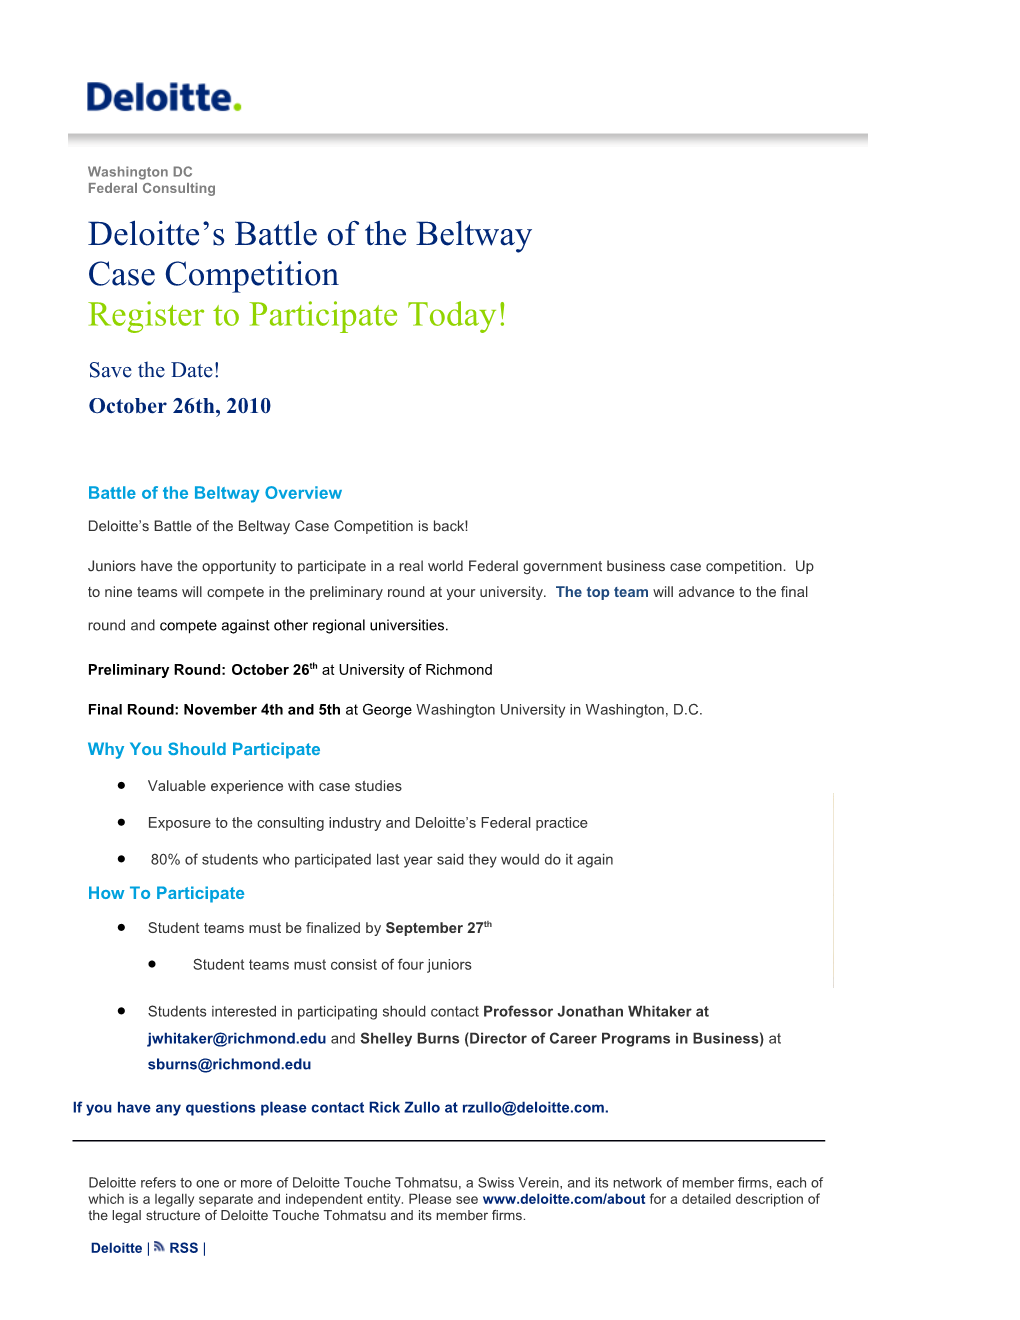 Washington DC Federal Consulting Deloitte S Battle of the Beltway Case Competition Register